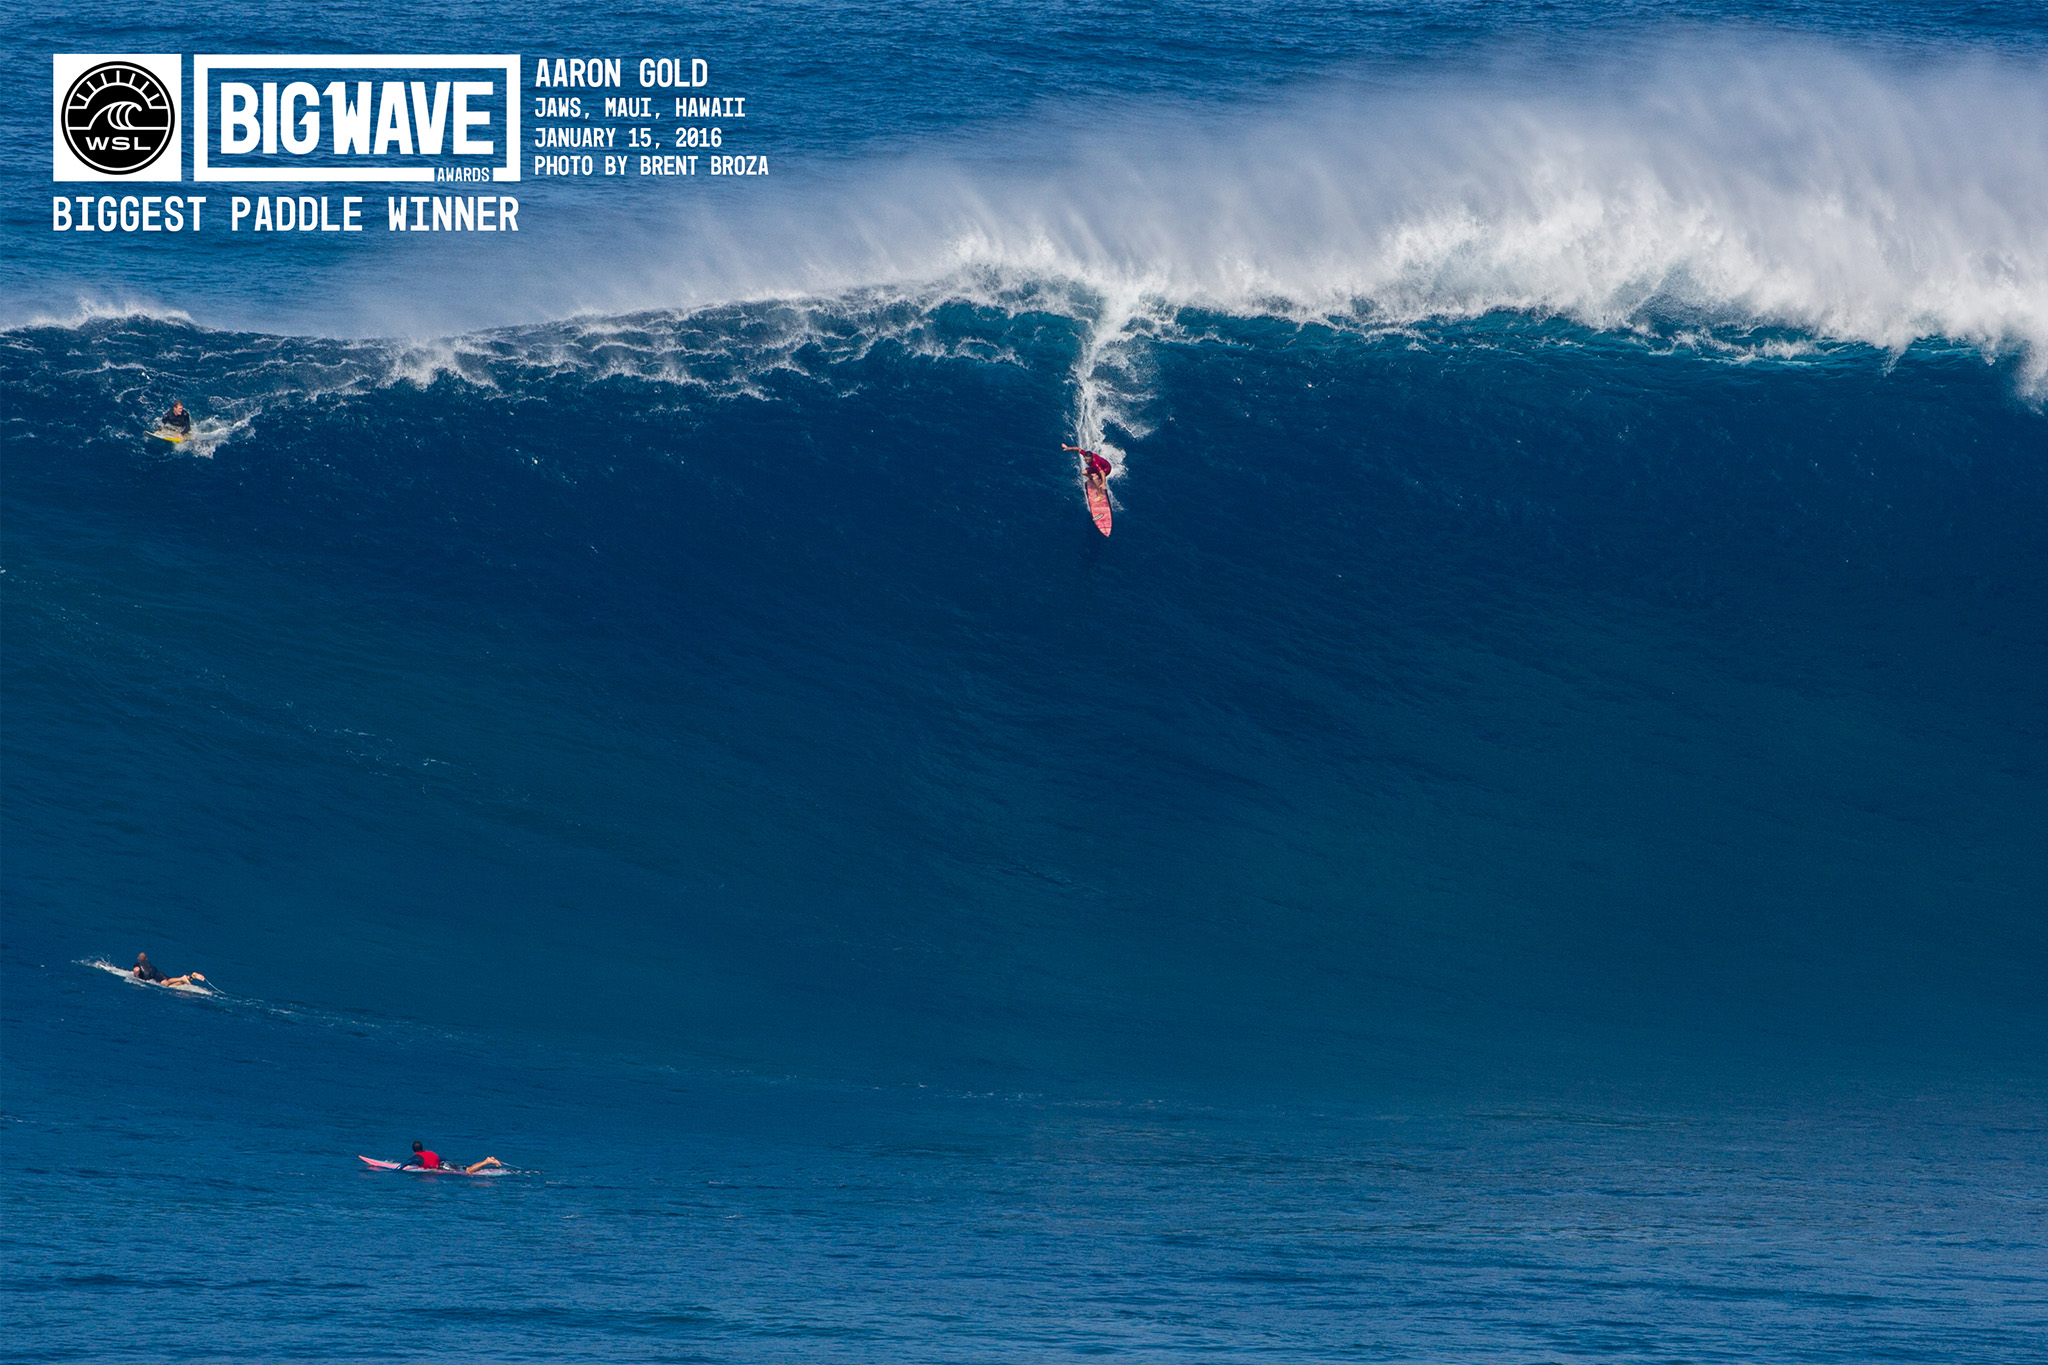 Aaron Gold won the biggest paddle wave award and also set a new world record at 63 ft. Photo: WSL 